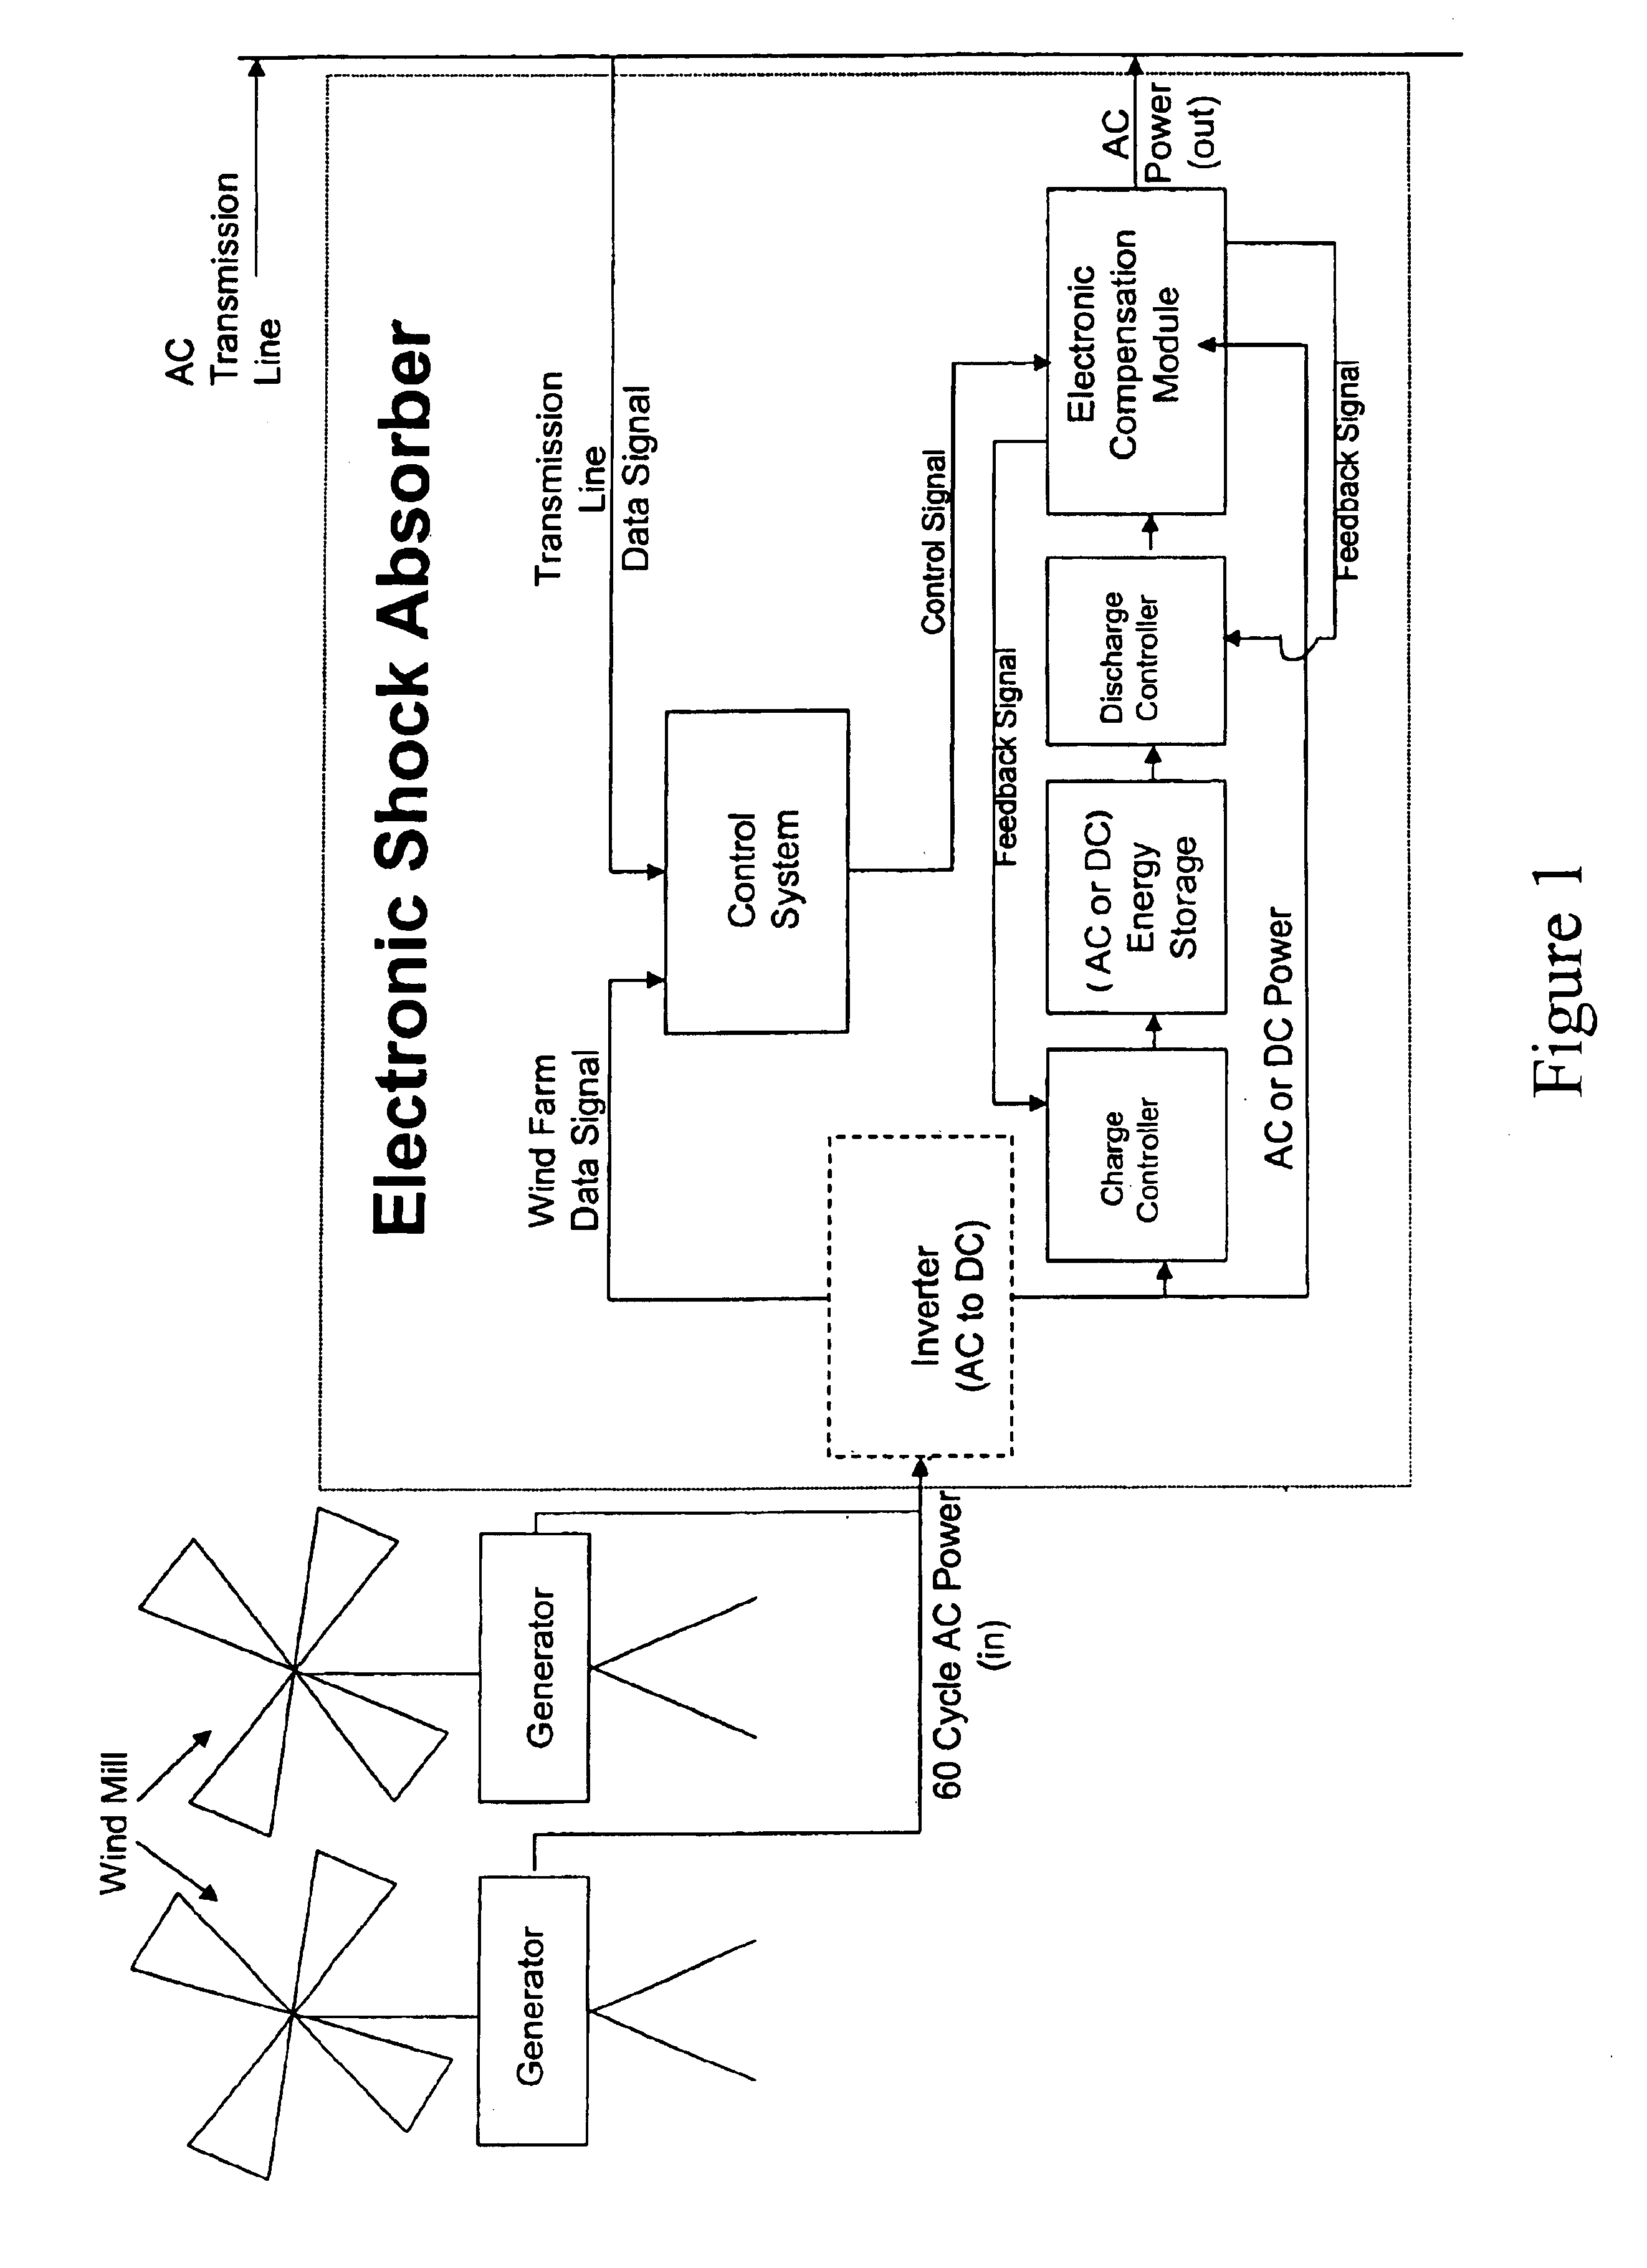 Power control interface between a wind farm and a power transmission system